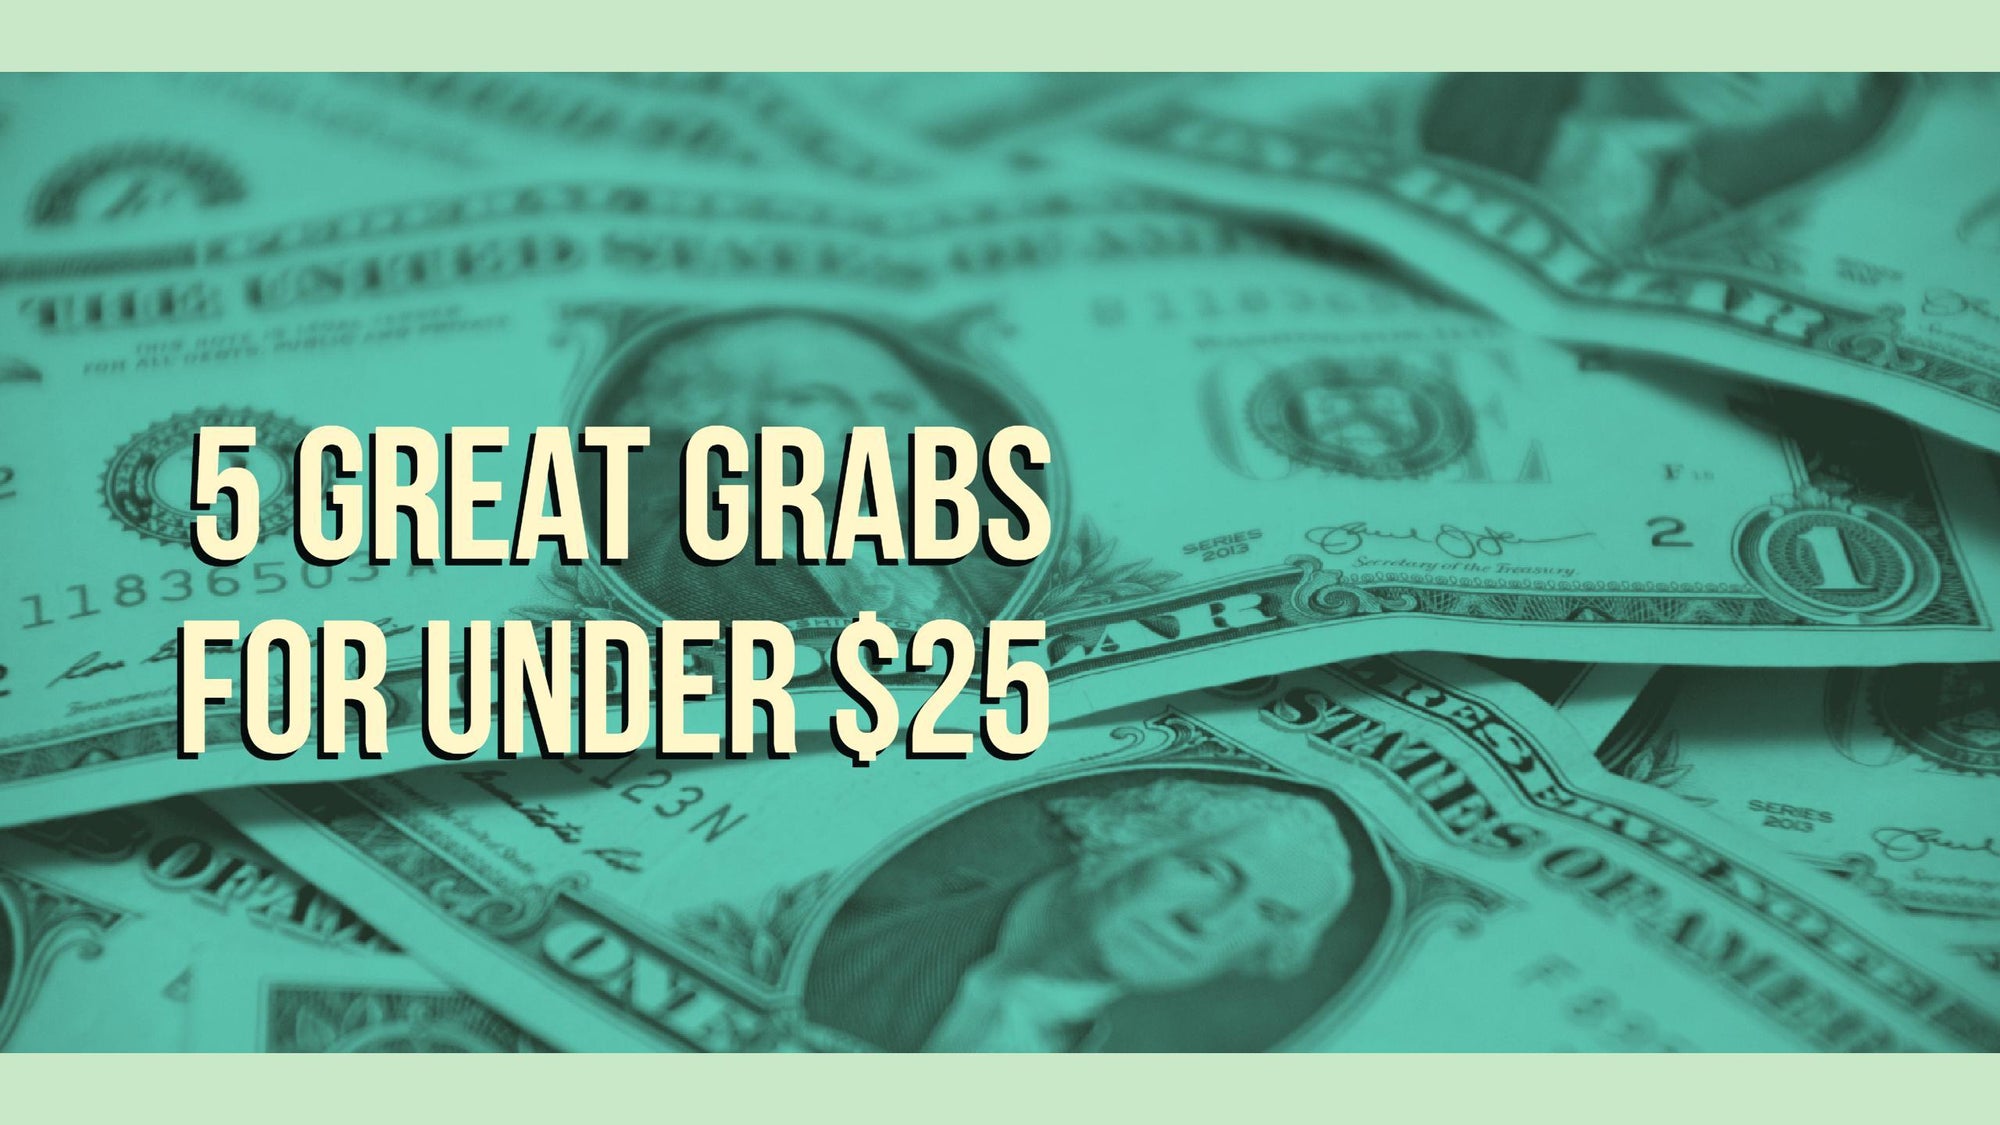 5 Great Grabs for Under $25